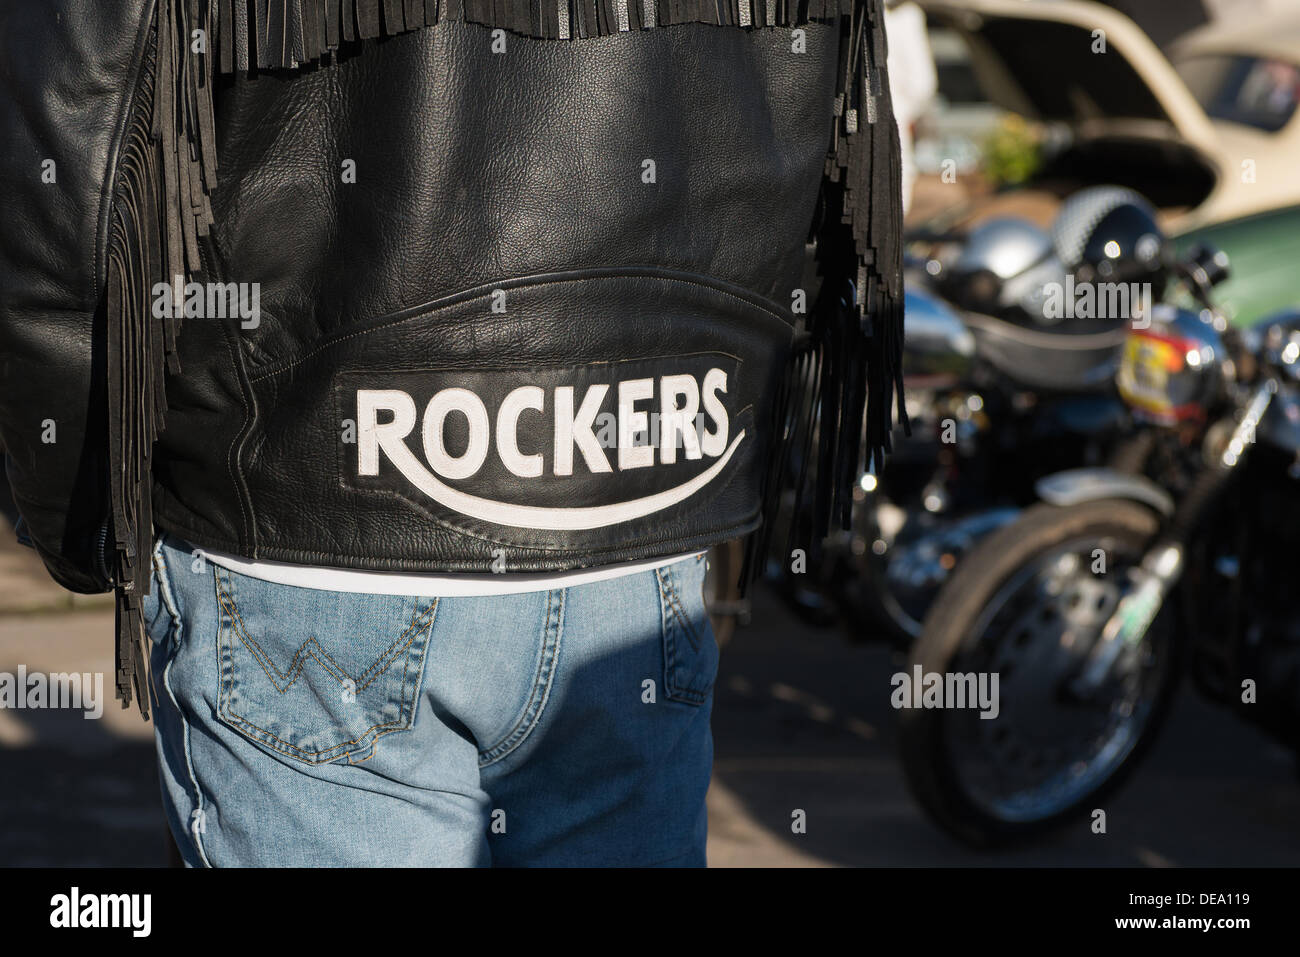 Chichester, West Sussex, UK. 14th Sep, 2013. Goodwood Revival. Goodwood Racing Circuit, West Sussex - Saturday 14th September. A black leather jacket with Rockers emblazoned across the back is worn by a man standing next to some vintage motorbikes. Credit:  MeonStock/Alamy Live News Stock Photo